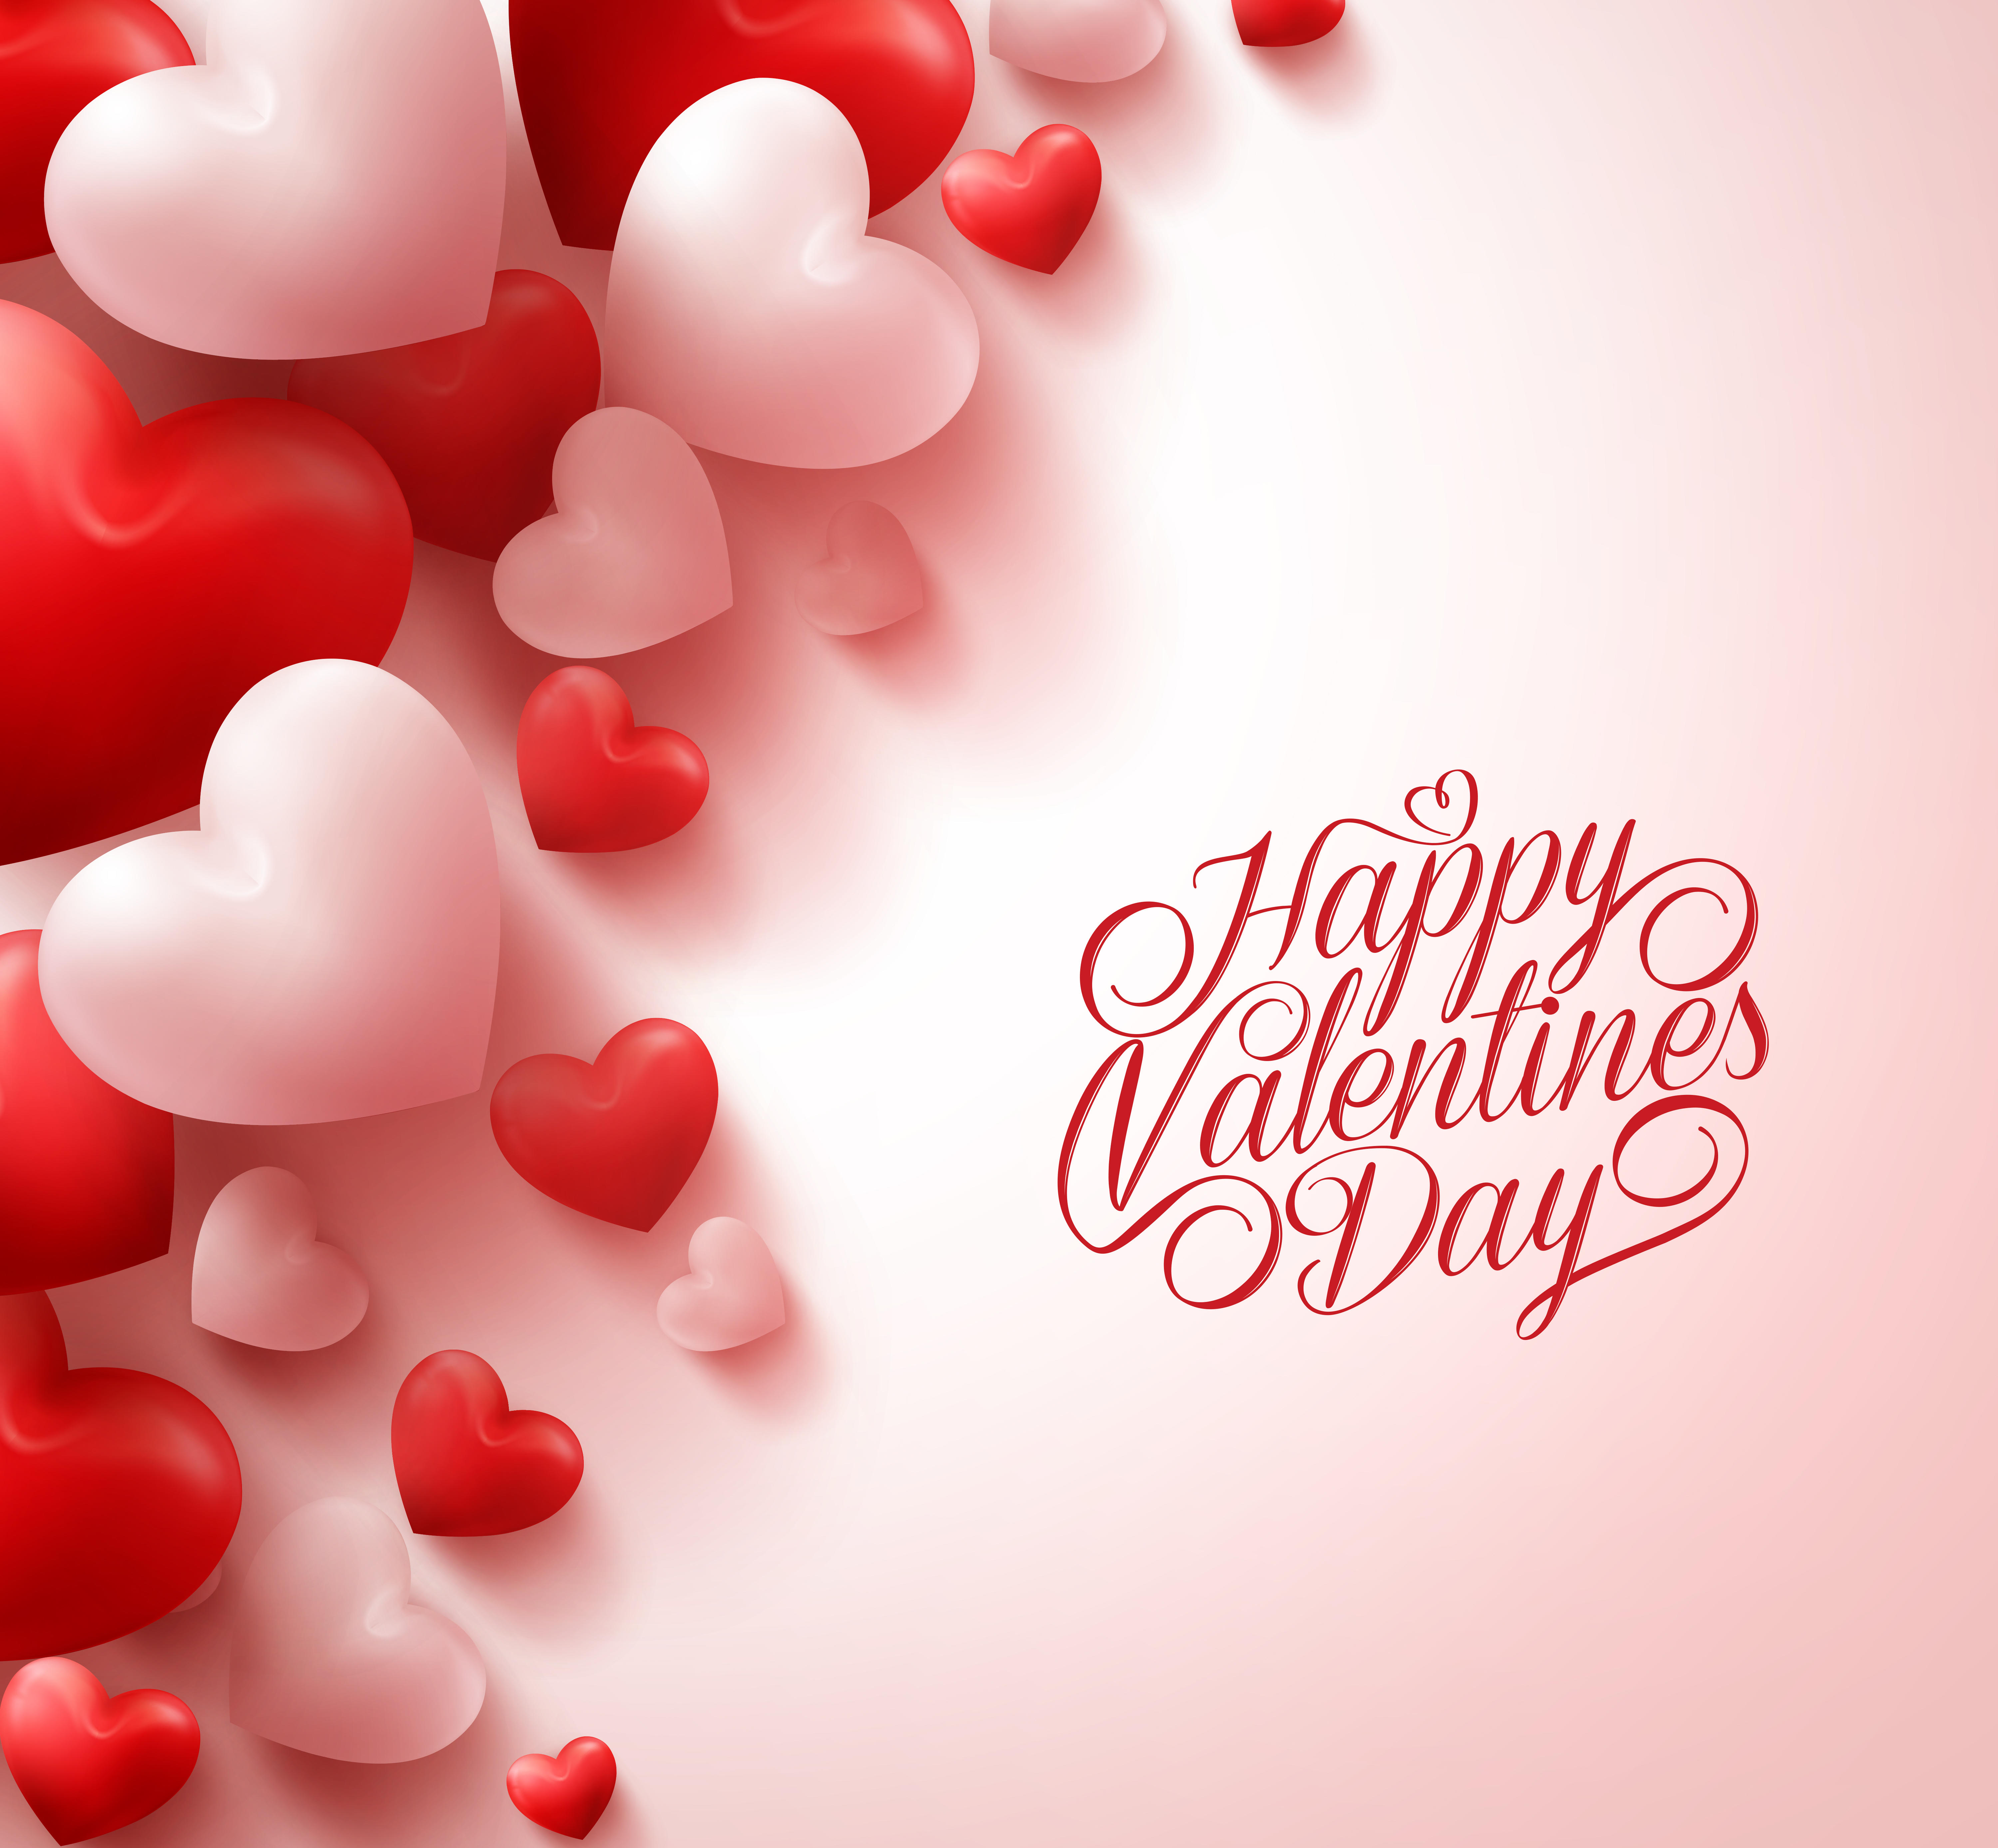 Wallpapers happy valentine`s day text a day of lovers on the desktop